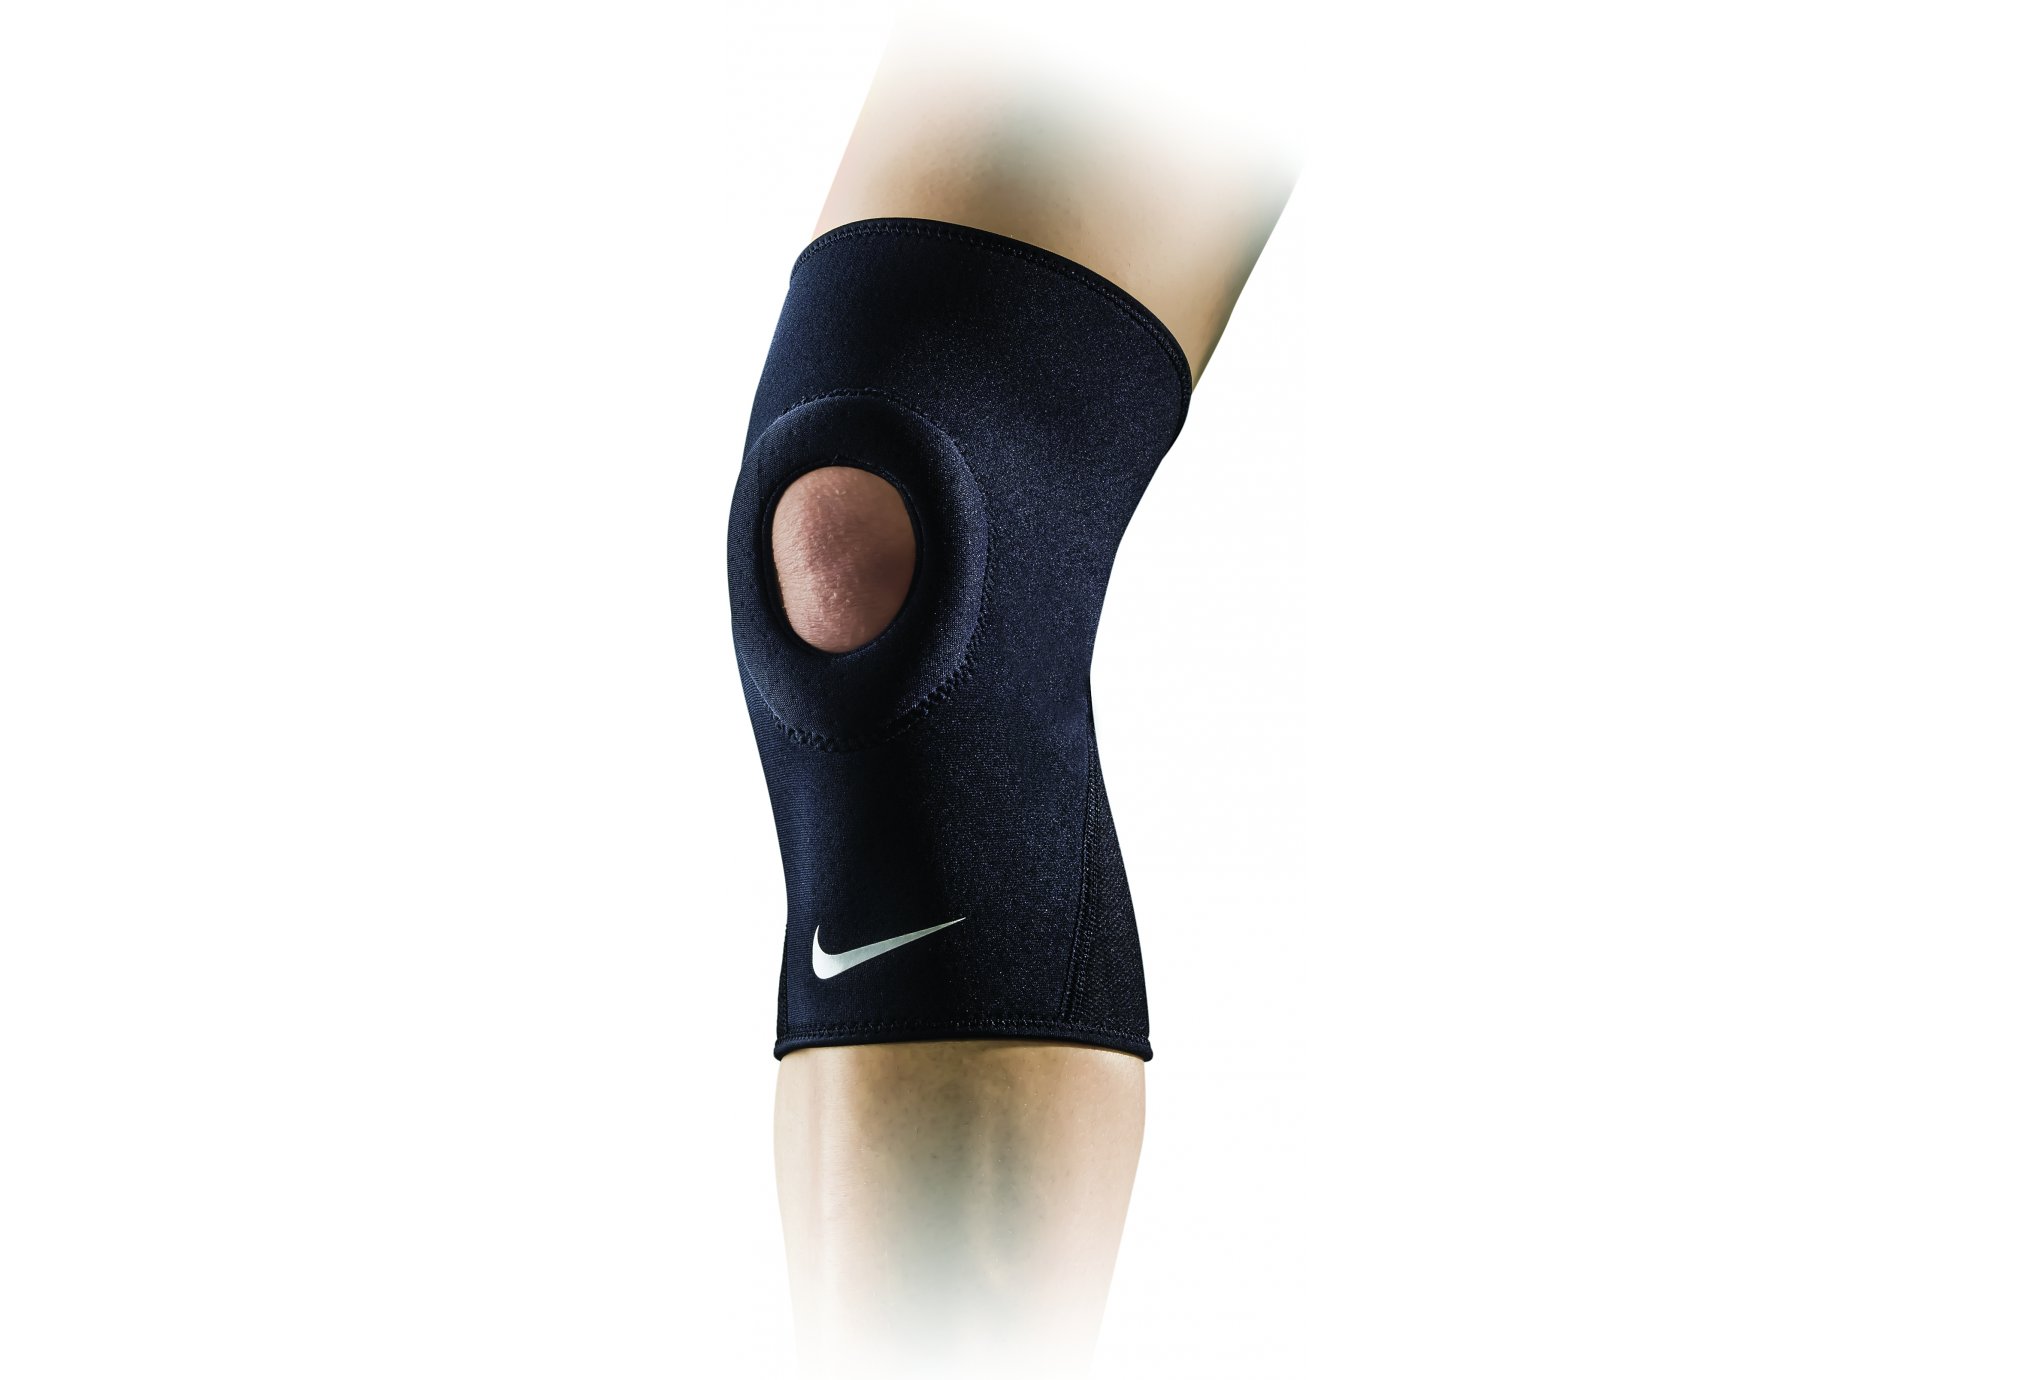 Nike Genouillère Open Patella Protection musculaire & articulaire